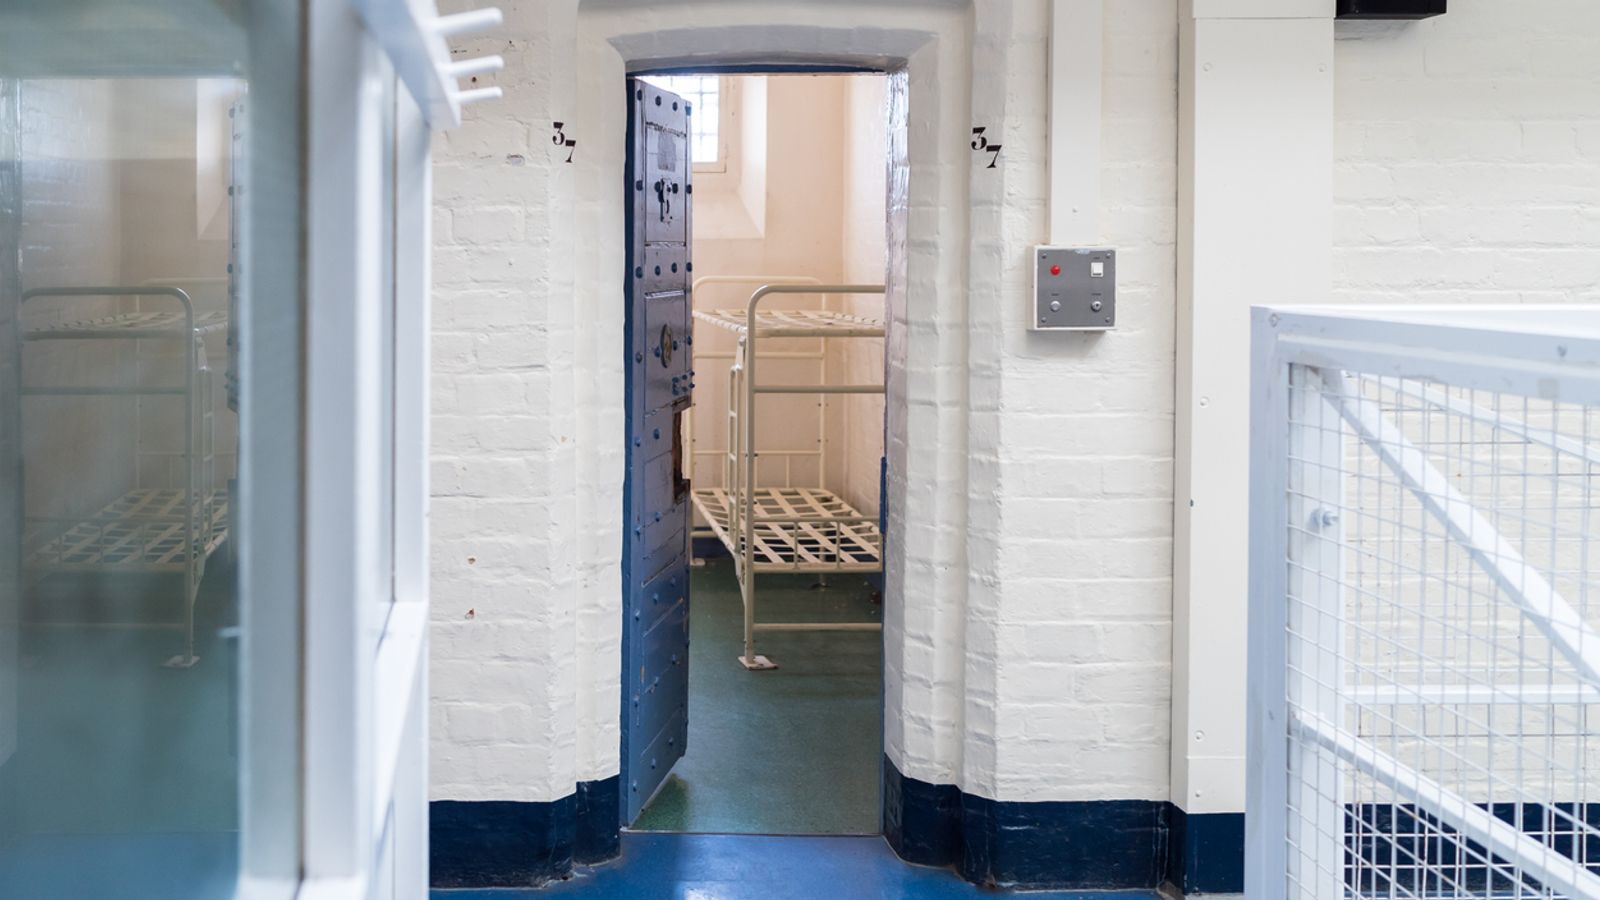 Prisoners early release scheme extended indefinitely, leaked documents show